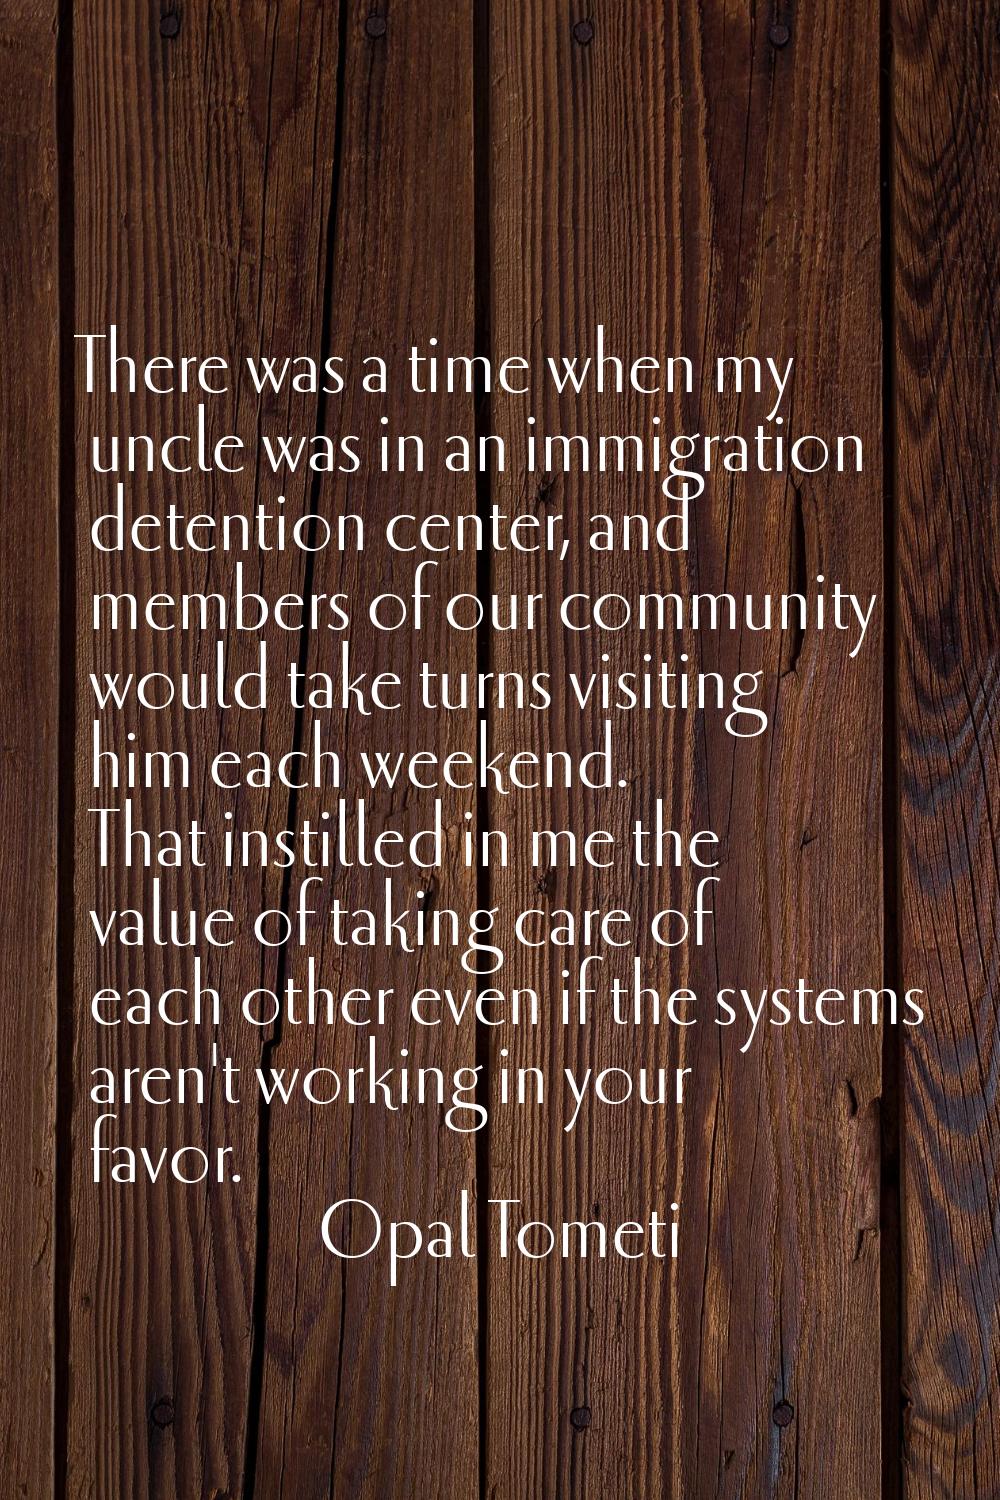 There was a time when my uncle was in an immigration detention center, and members of our community